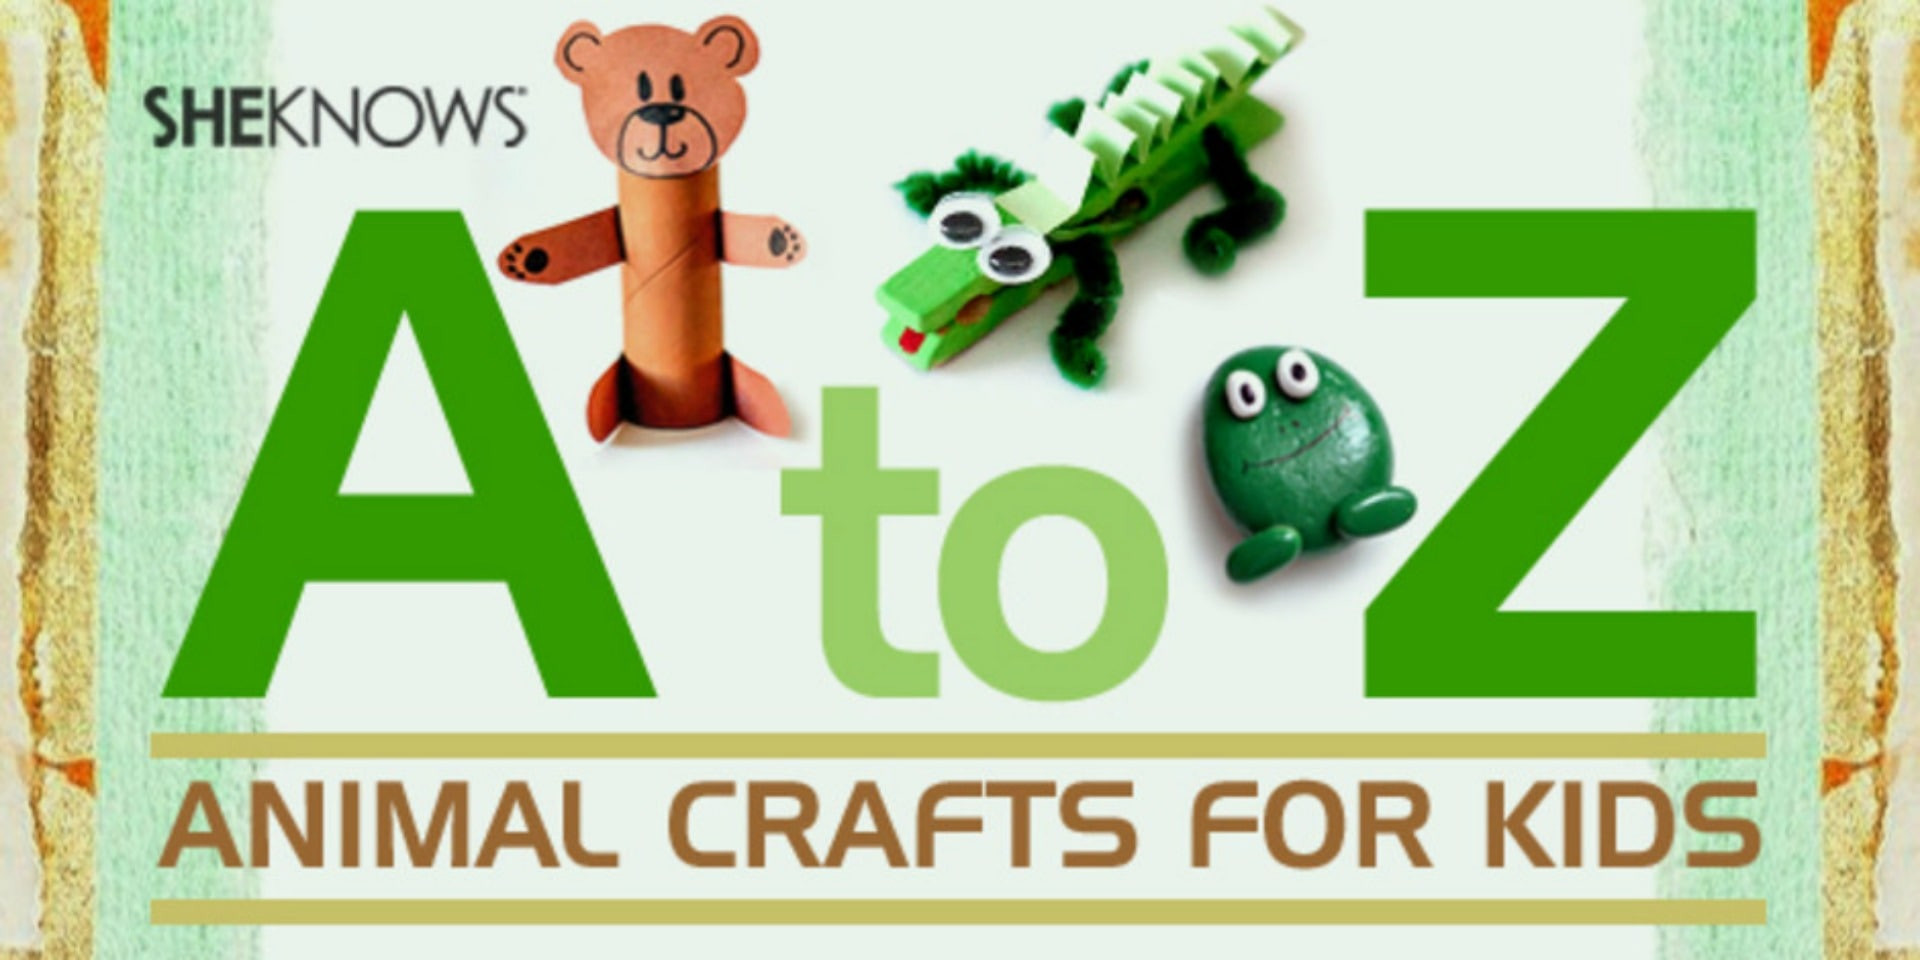 Animals Crafts For Kids
 Animal crafts you can make with your kids